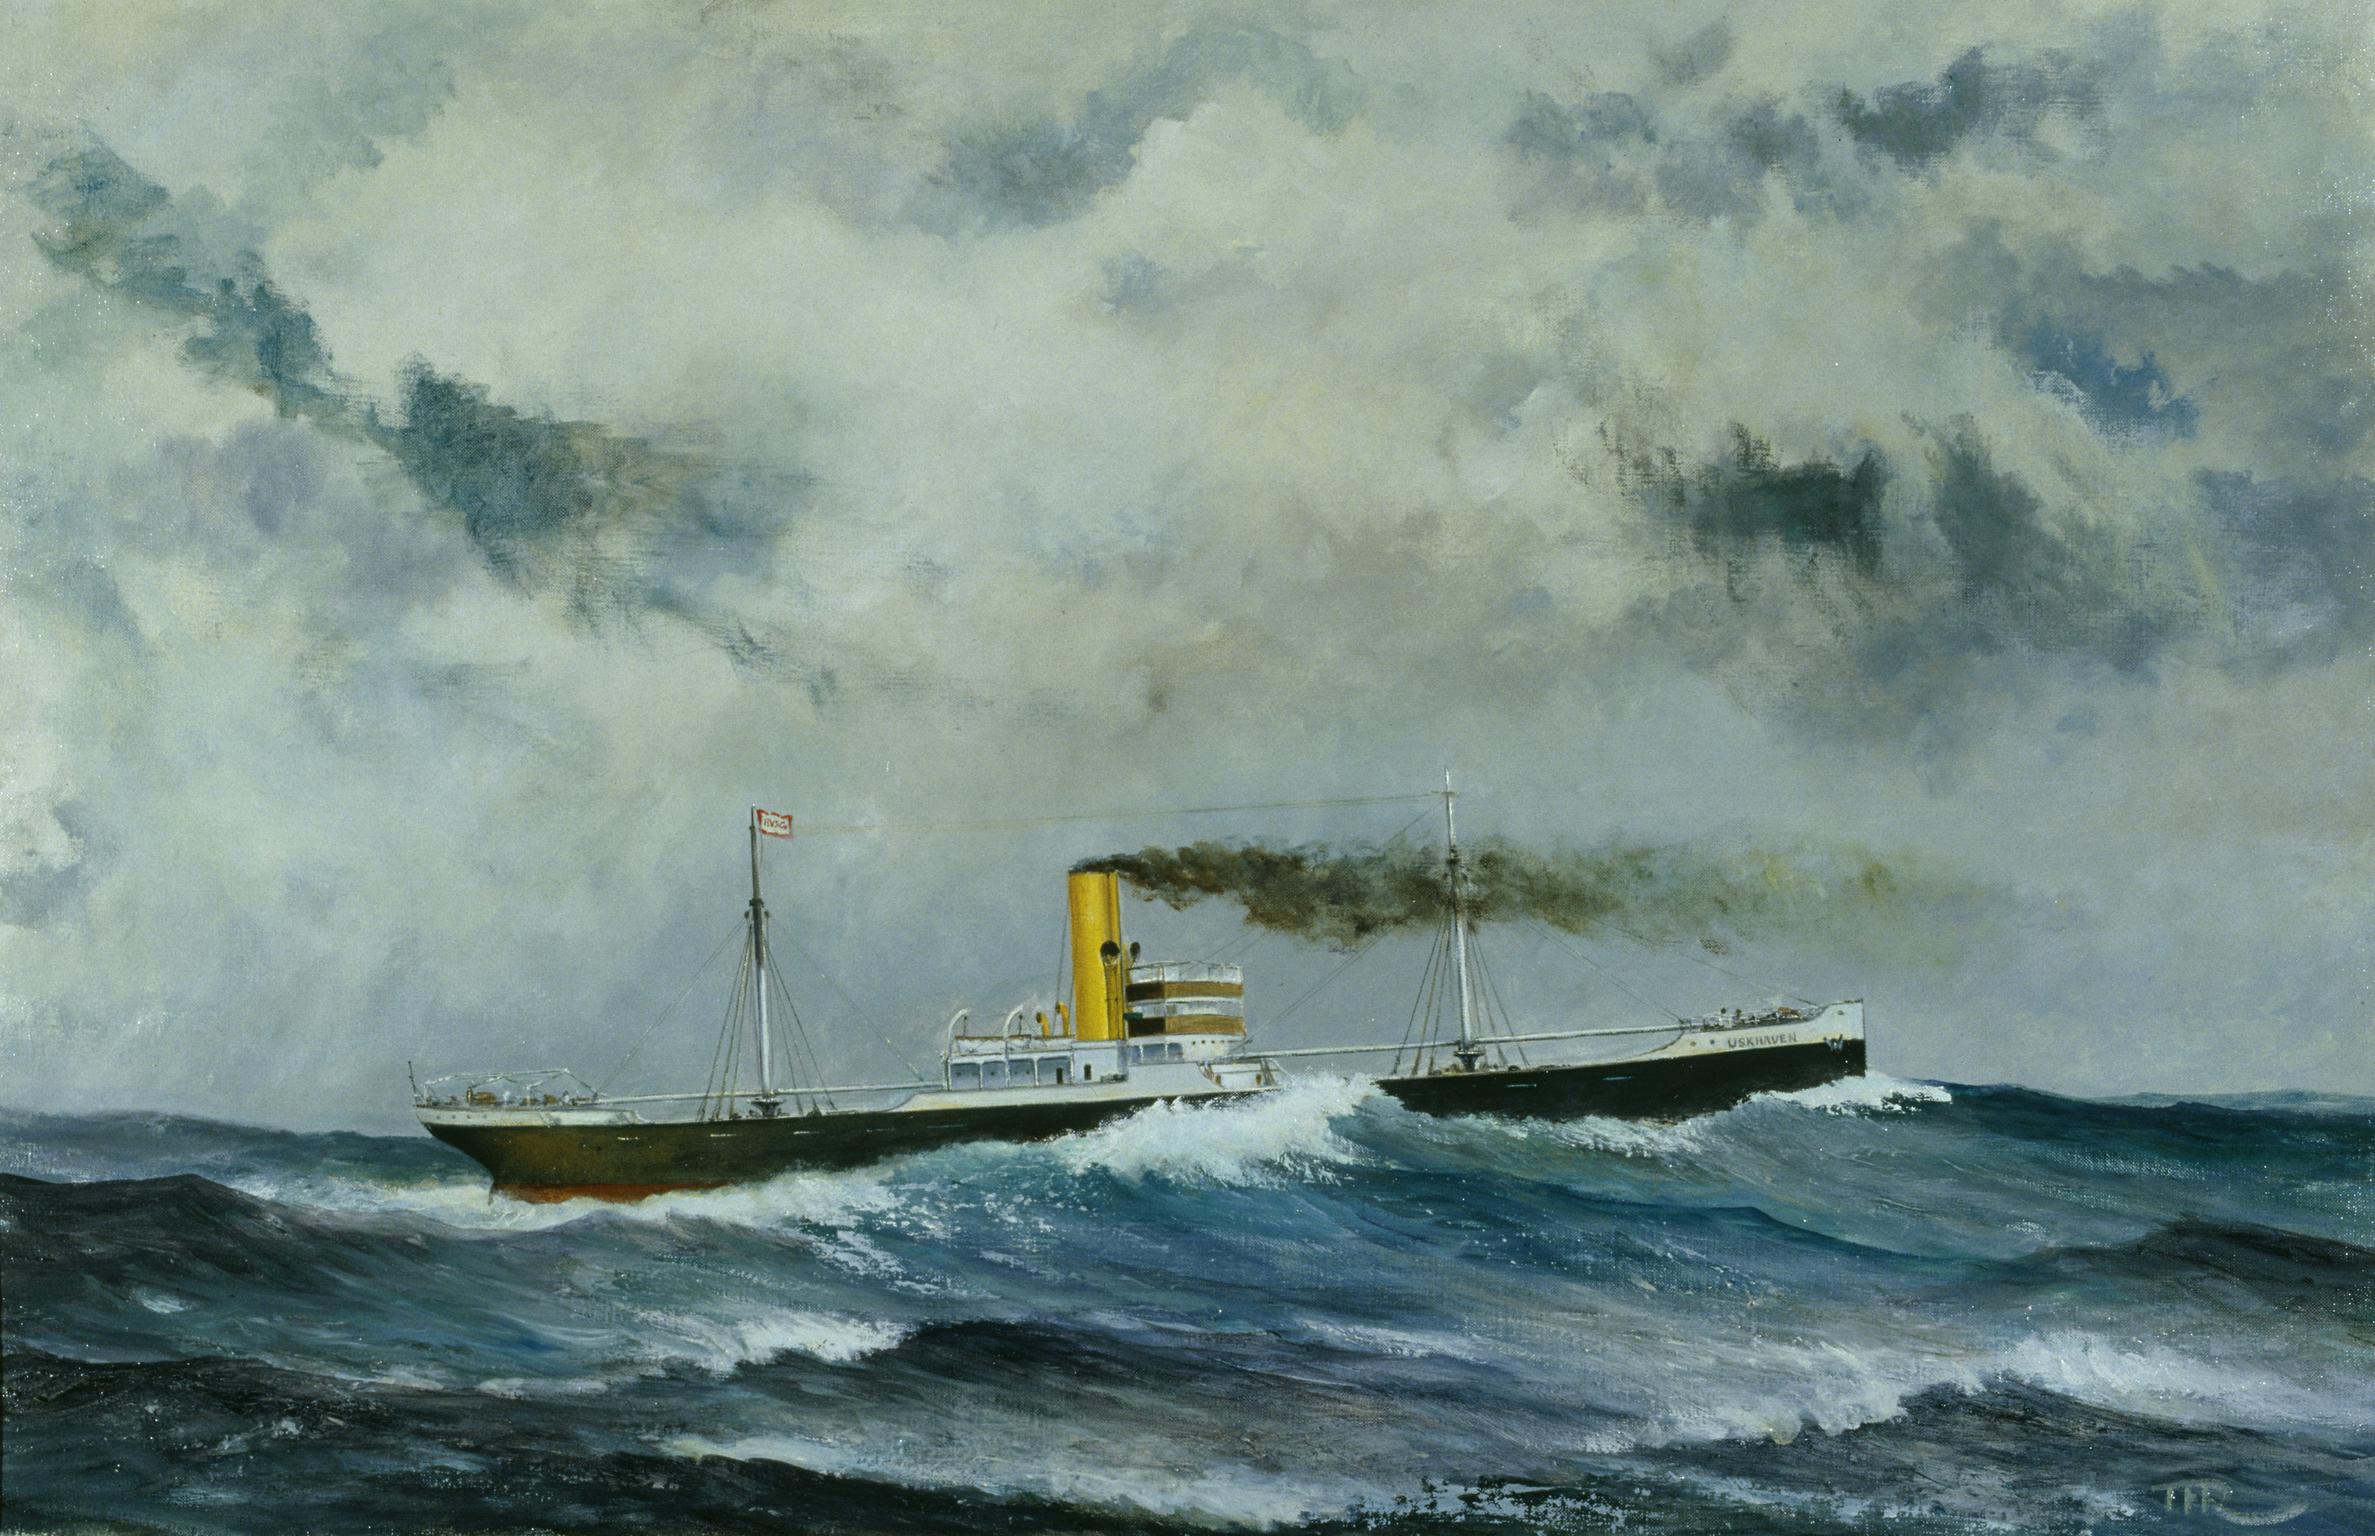 S.S. USKHAVEN (painting)